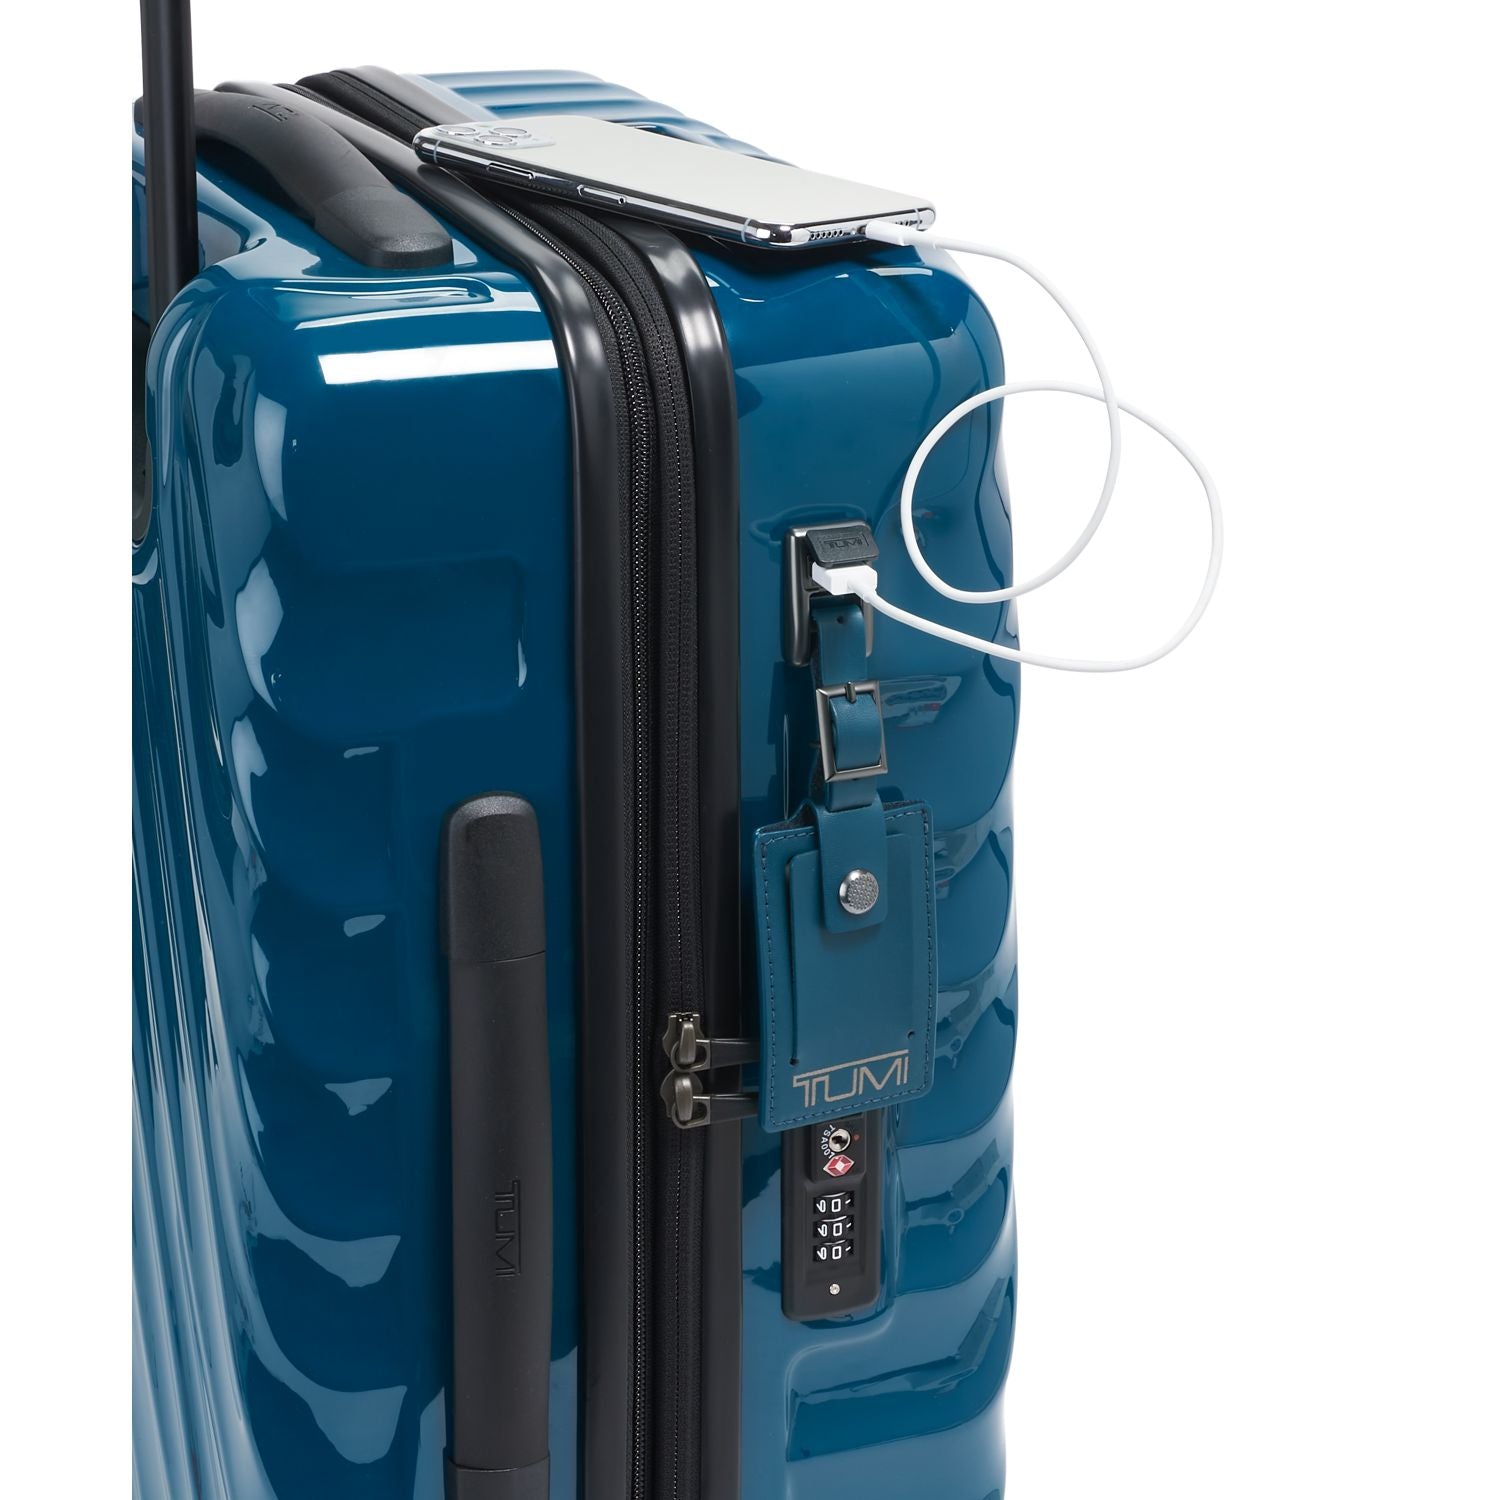 Tumi 105169 International Expandable Carry-on in Blue